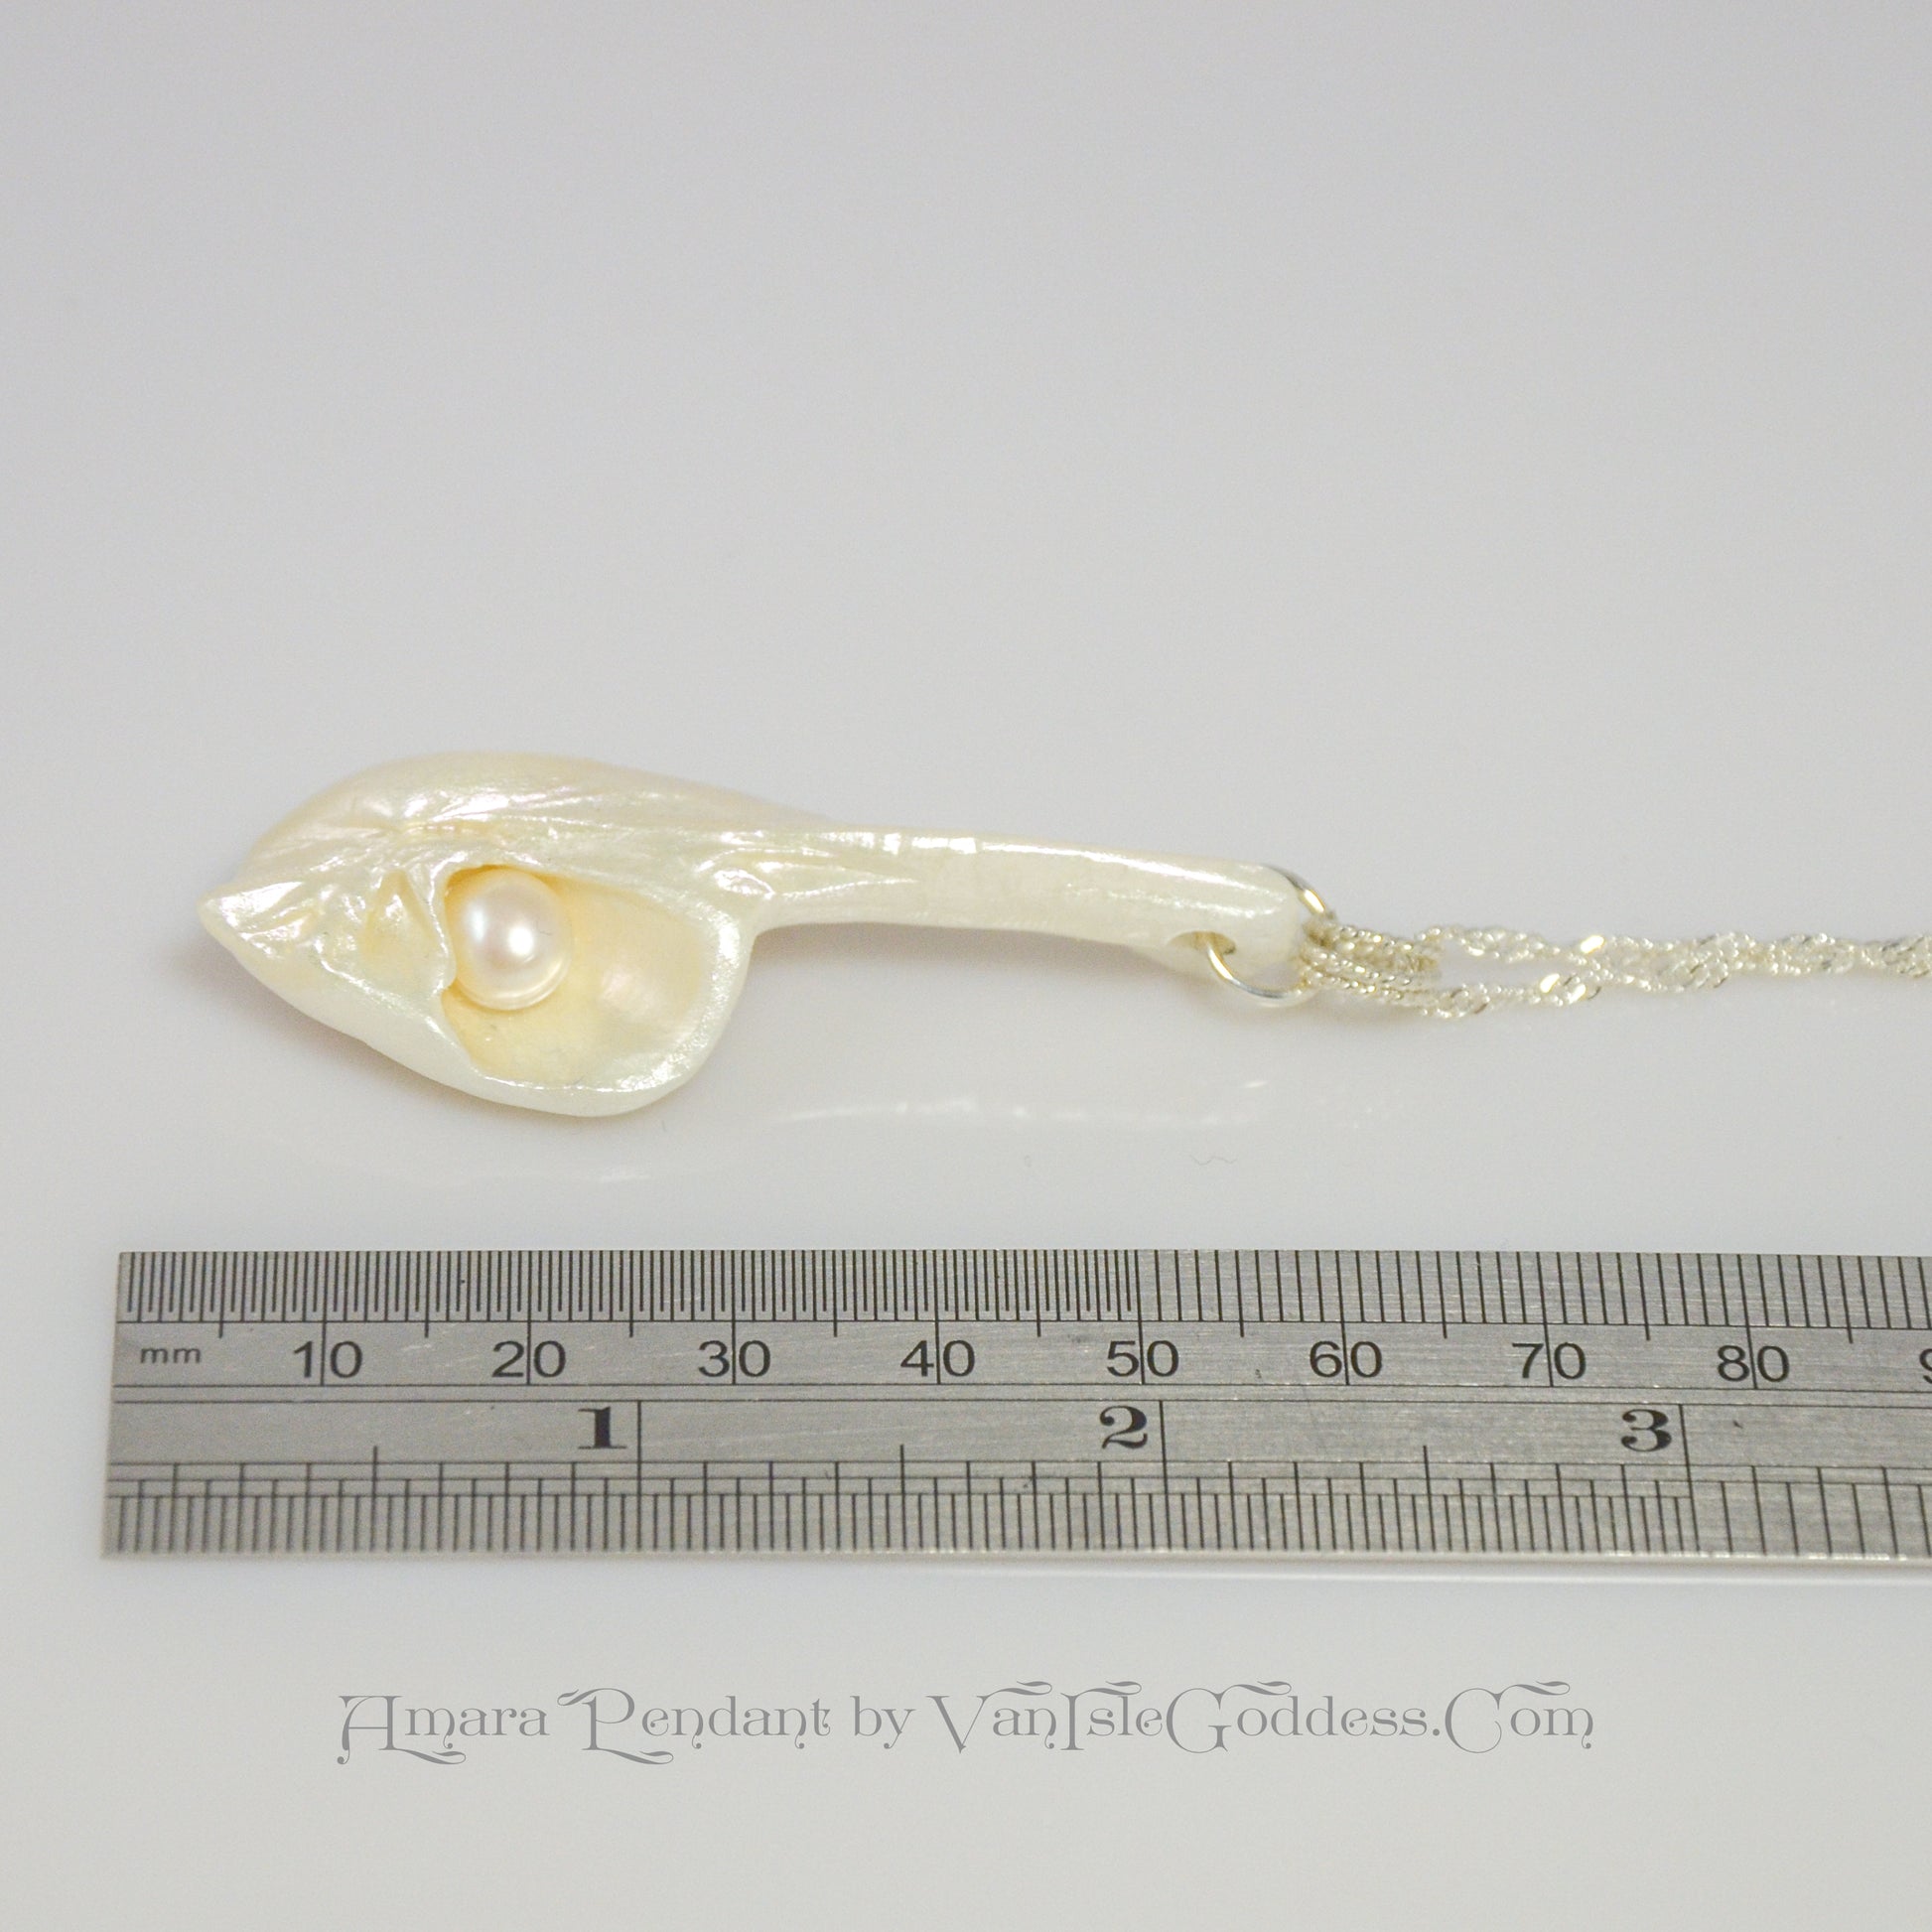 Amara is the name of this one of a kind pendant made from a natural seashell from the beach of Vancouver Island.  The pendant has a real freshwater pearl.  The pendant is being shown along side a ruler indicating the size of the pendant.